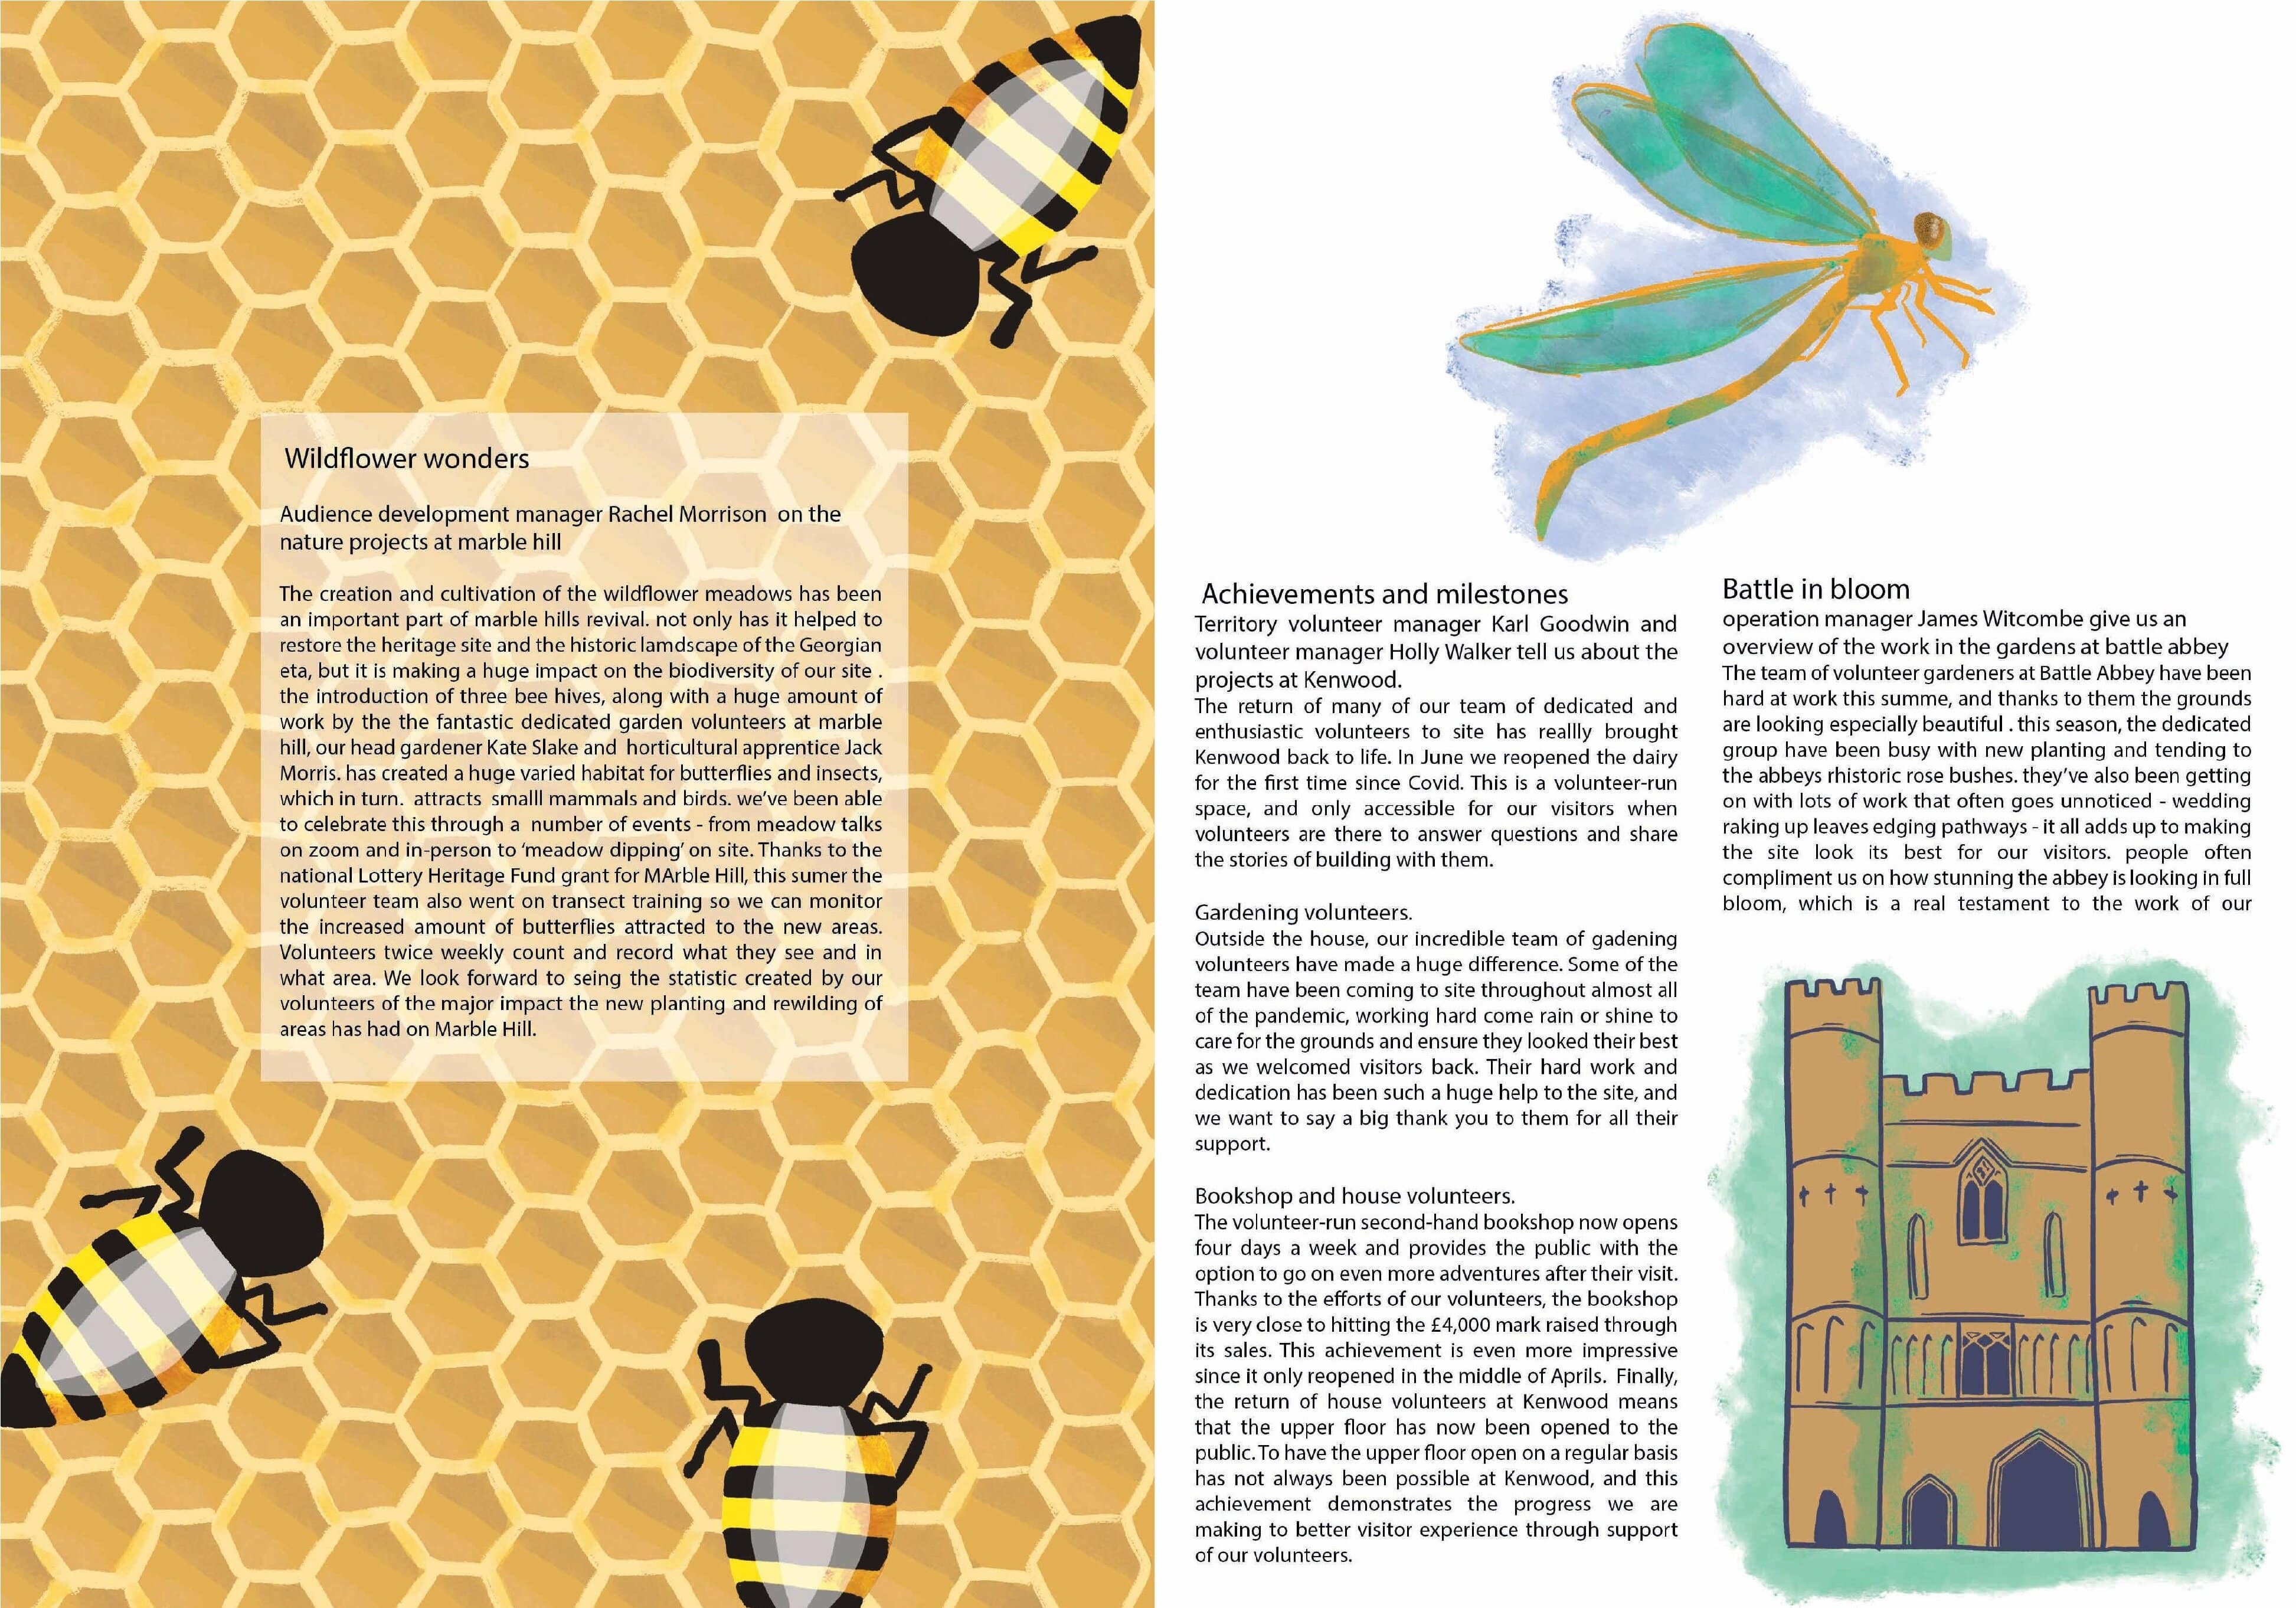 BA Illustration work by Mathilde Soler. Showing an article about the environment of an English Heritage worker. The article is illustrated with bees, dragonfly and castle.